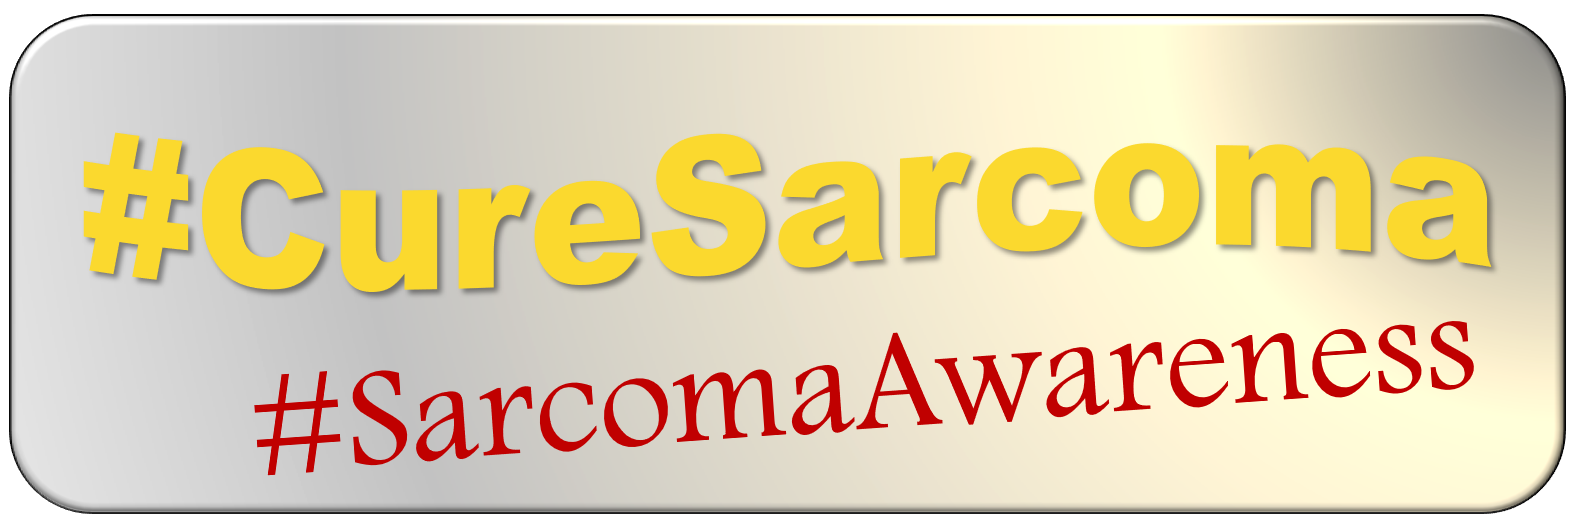 Hashtags related to Sarcoma Awareness Month